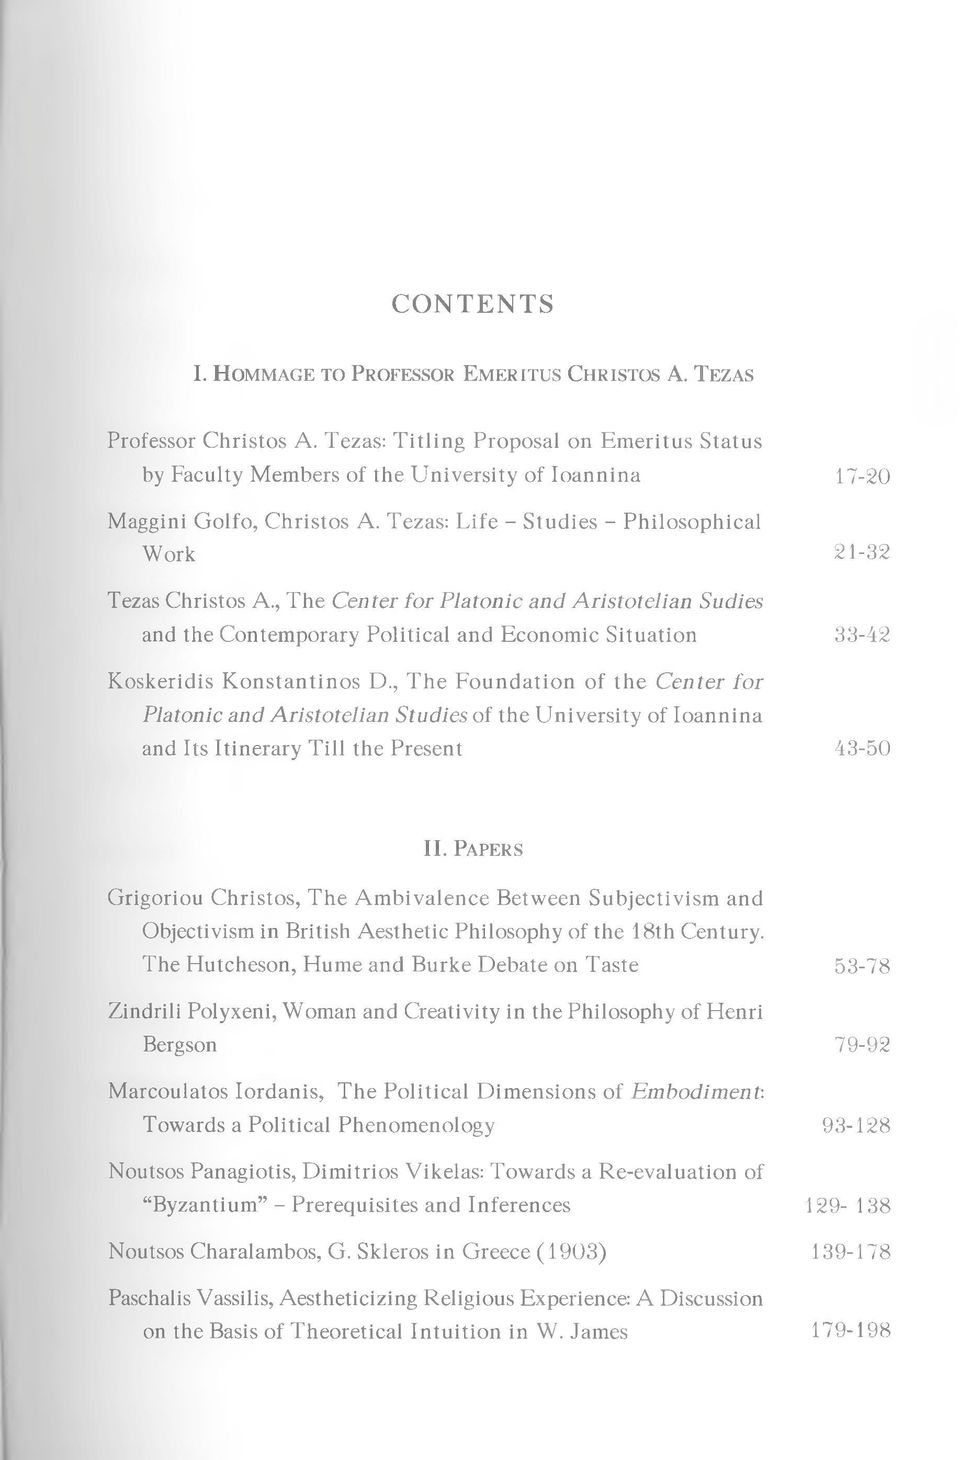 , The Center for Platonic and Aristotelian Sudies and the Contemporary Political and Economic Situation Koskeridis Konstantinos D.